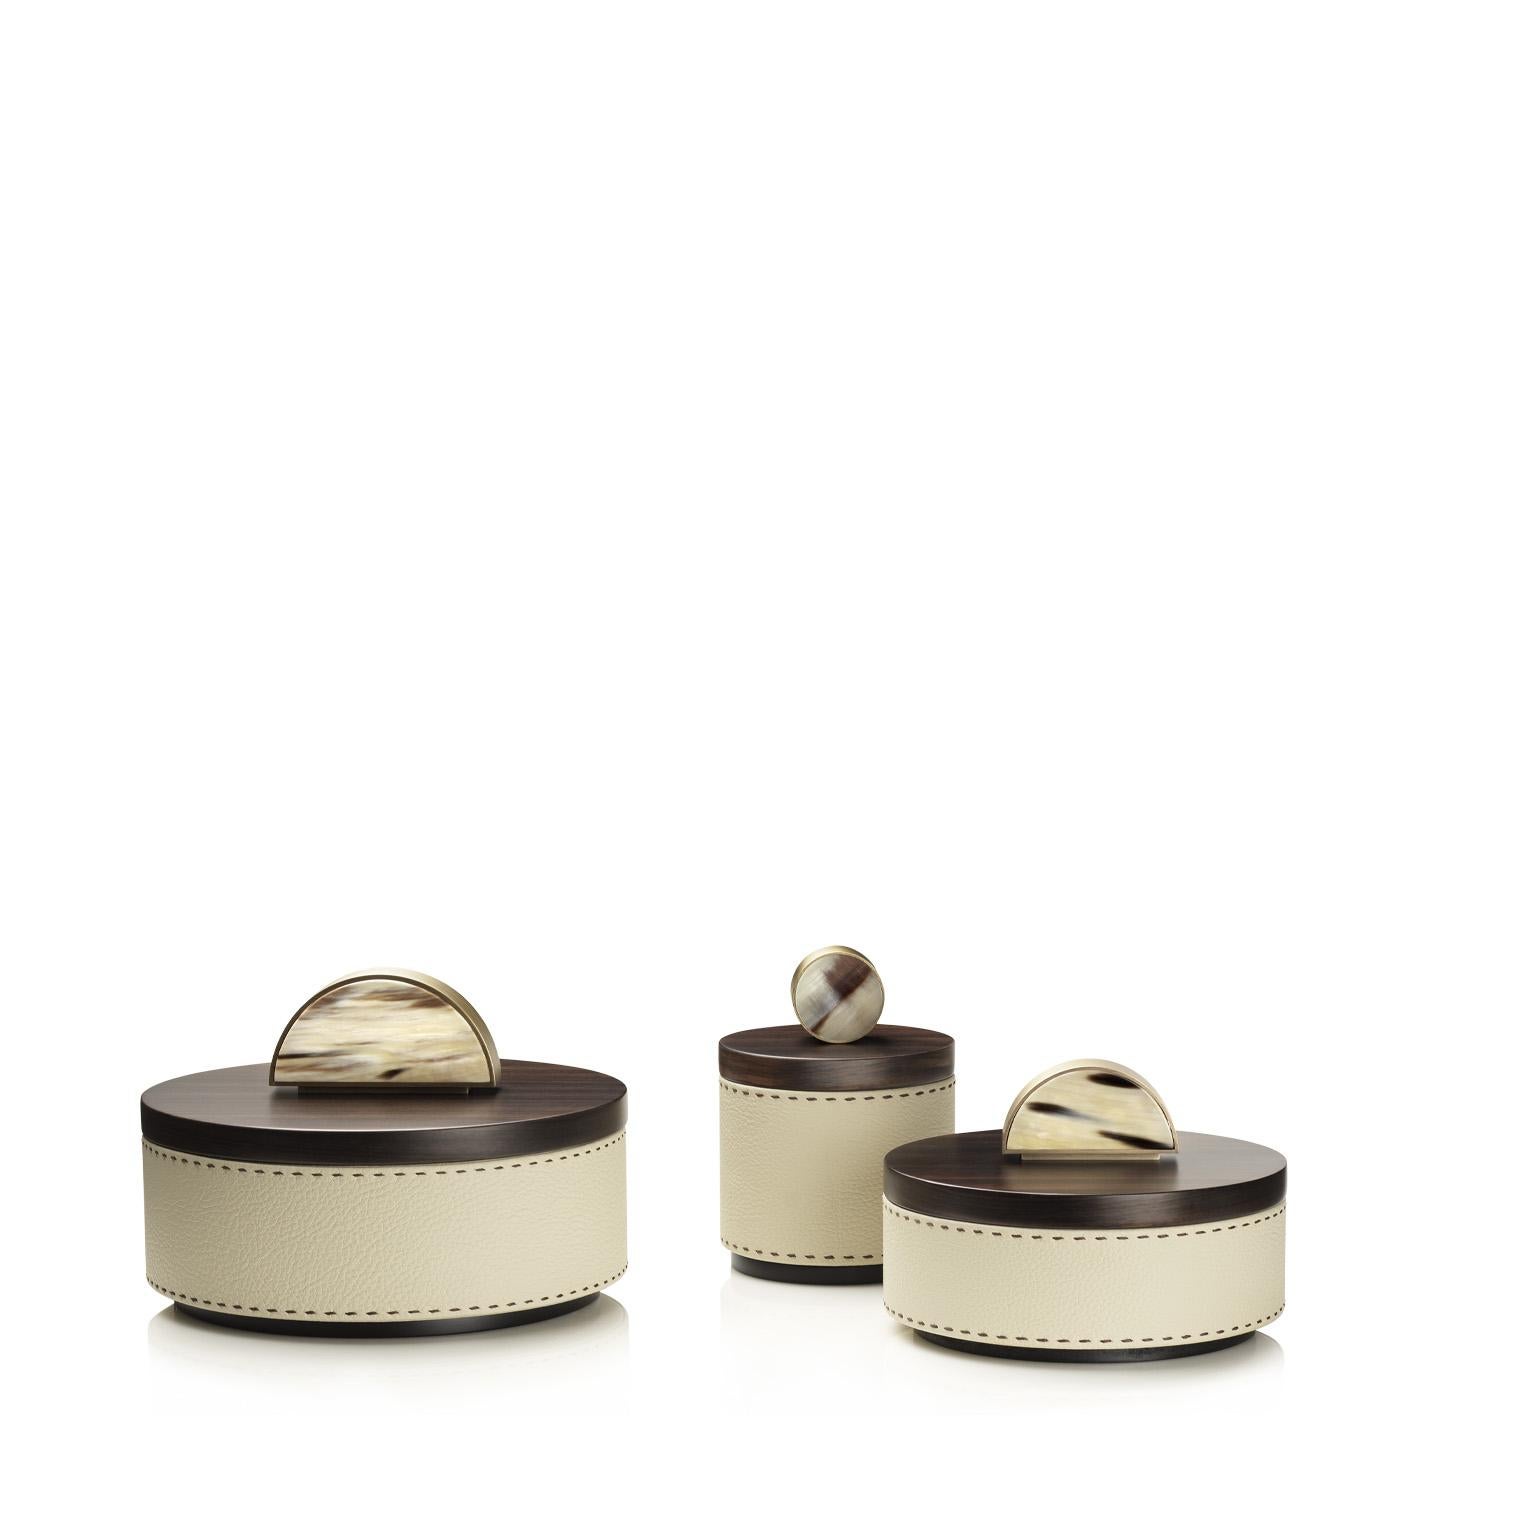 With its timeless allure and sophisticated aesthetic, our Agneta box will complement any decor. Lined in Aida pebbled leather in a neutral Ice-cream colour, the box flaunts a contrasting handmade dark brown stitching. The lid is handcrafted from